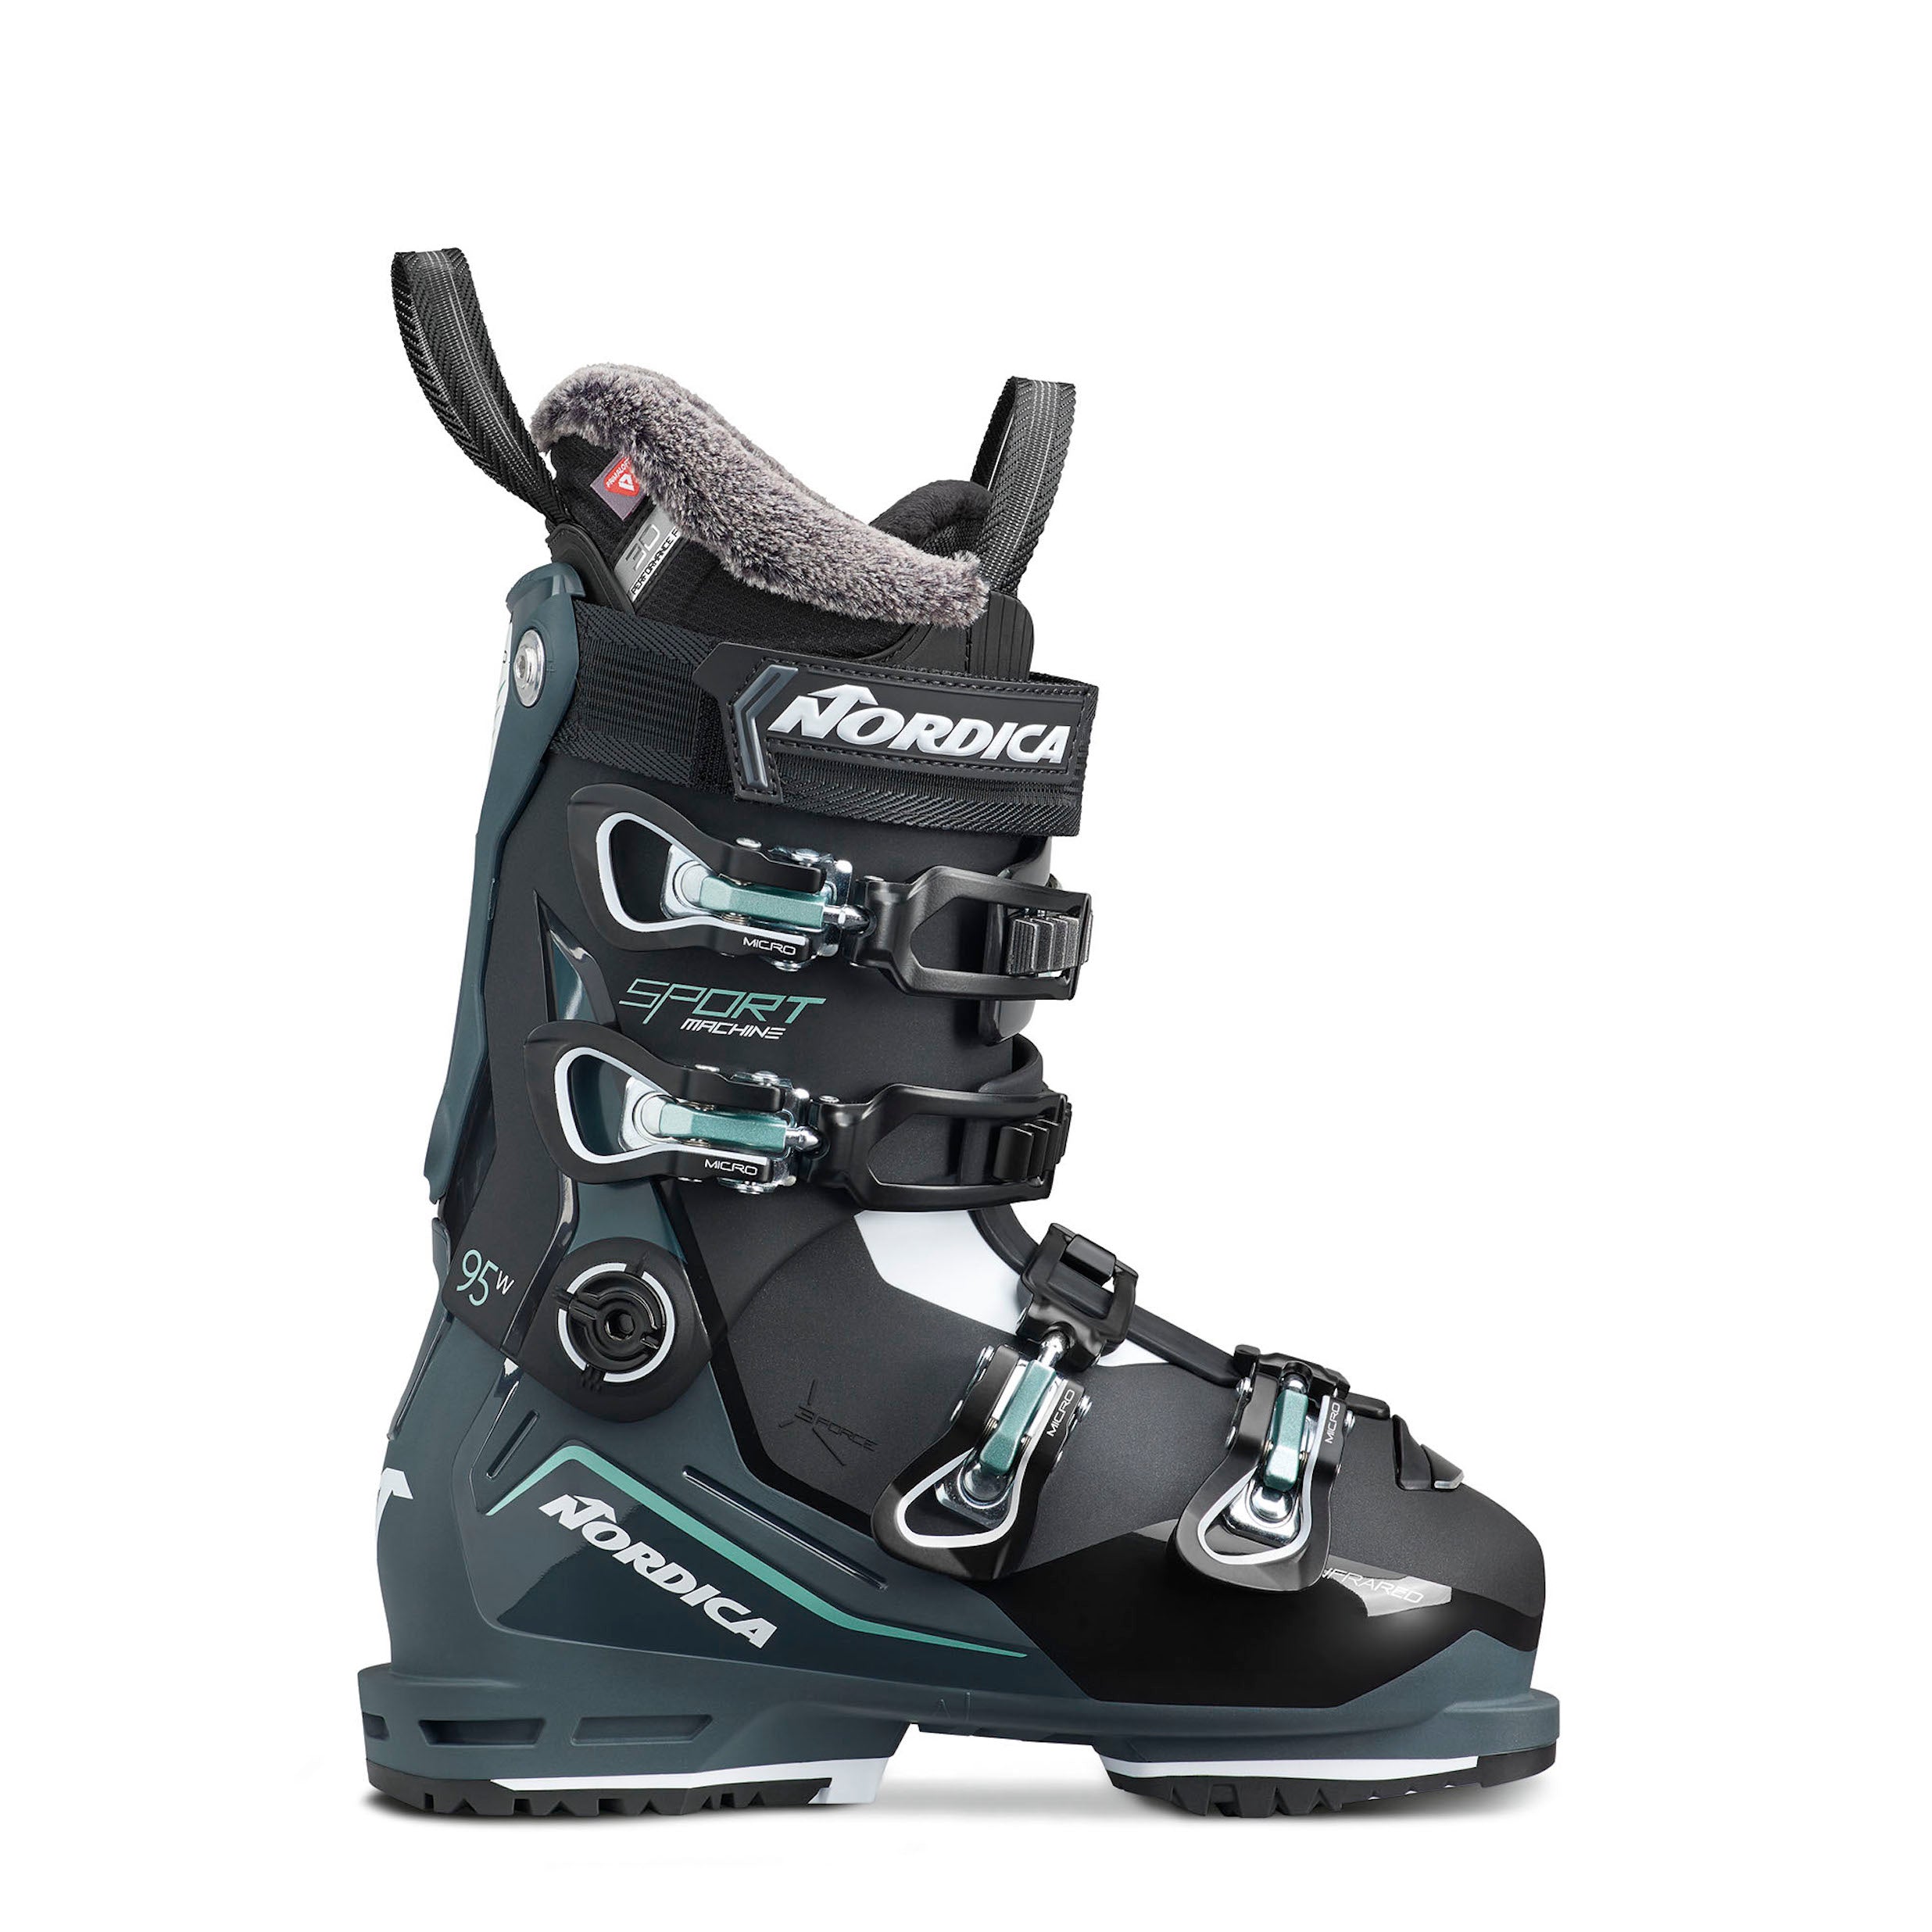 Women's Nordica Sportmachine 3 95 women's ski boot, green-gray and black with blue accents.